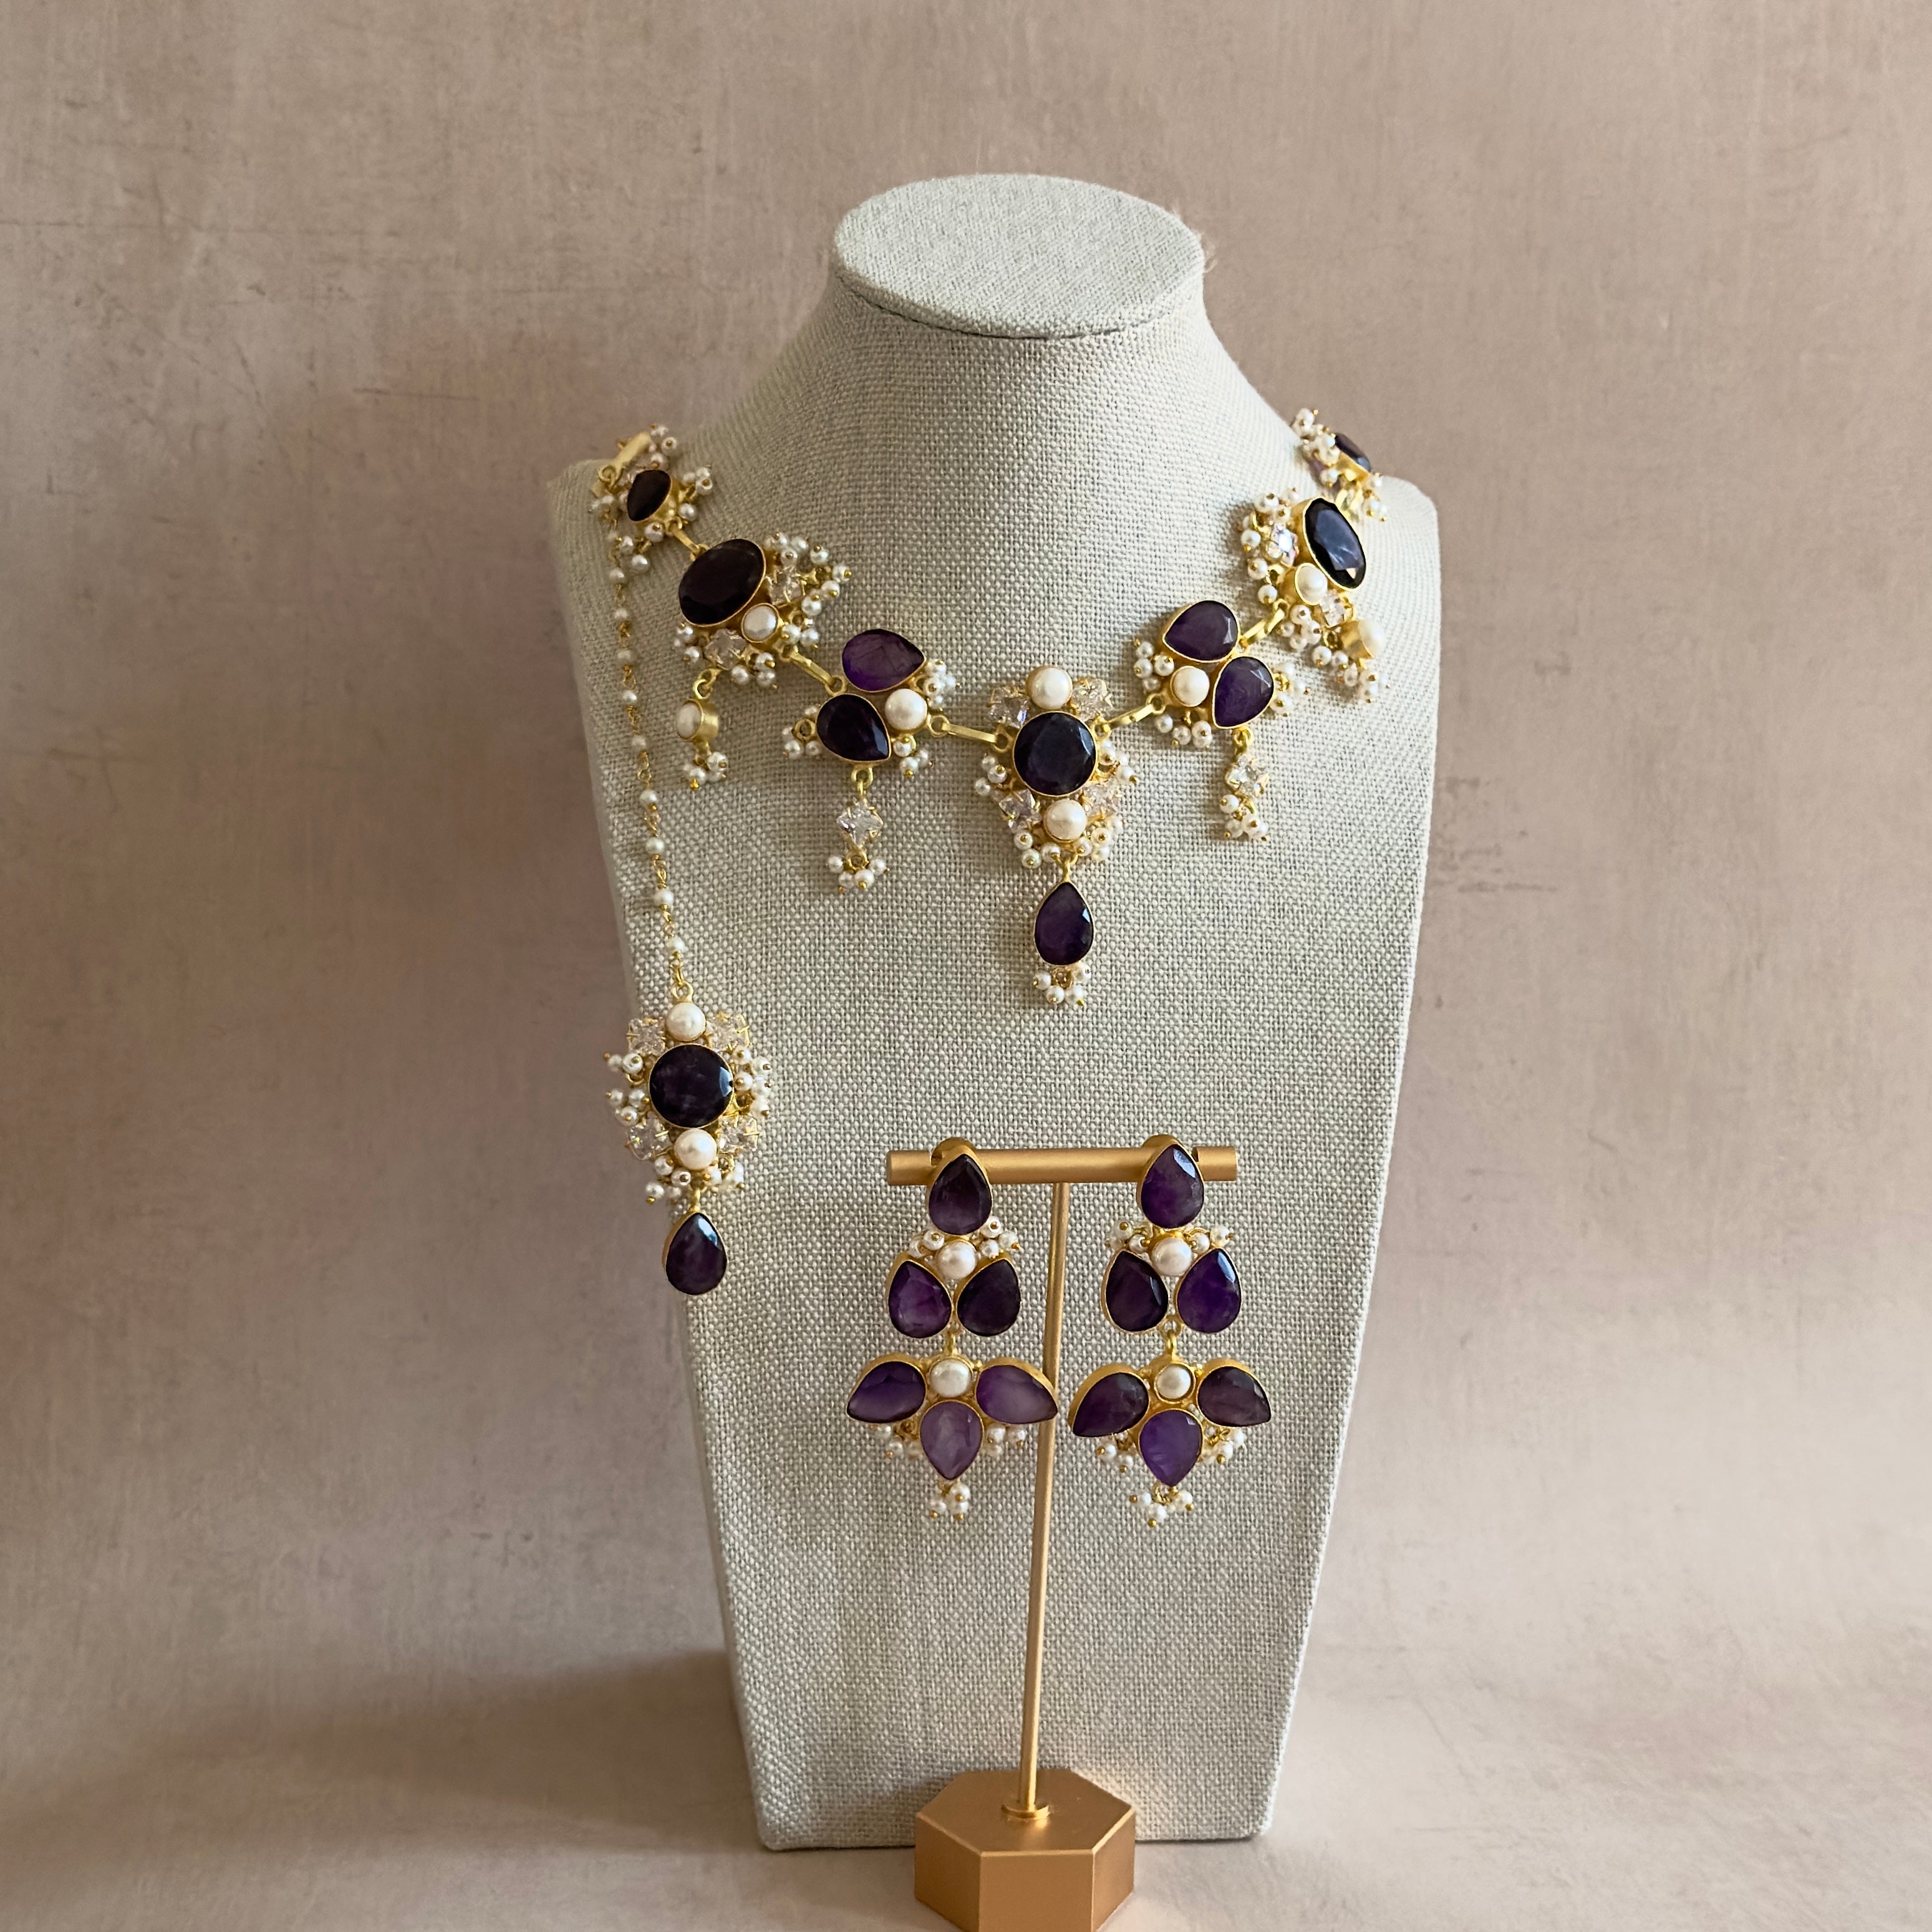 Elevate your style with our Bali Purple Necklace Set! Adorned with hand cut amethyst stones, freshwater pearls, and sparkling cubic zirconia, this set radiates beauty and sophistication. Complete with matching earrings and tikka. Perfect for any occasion.